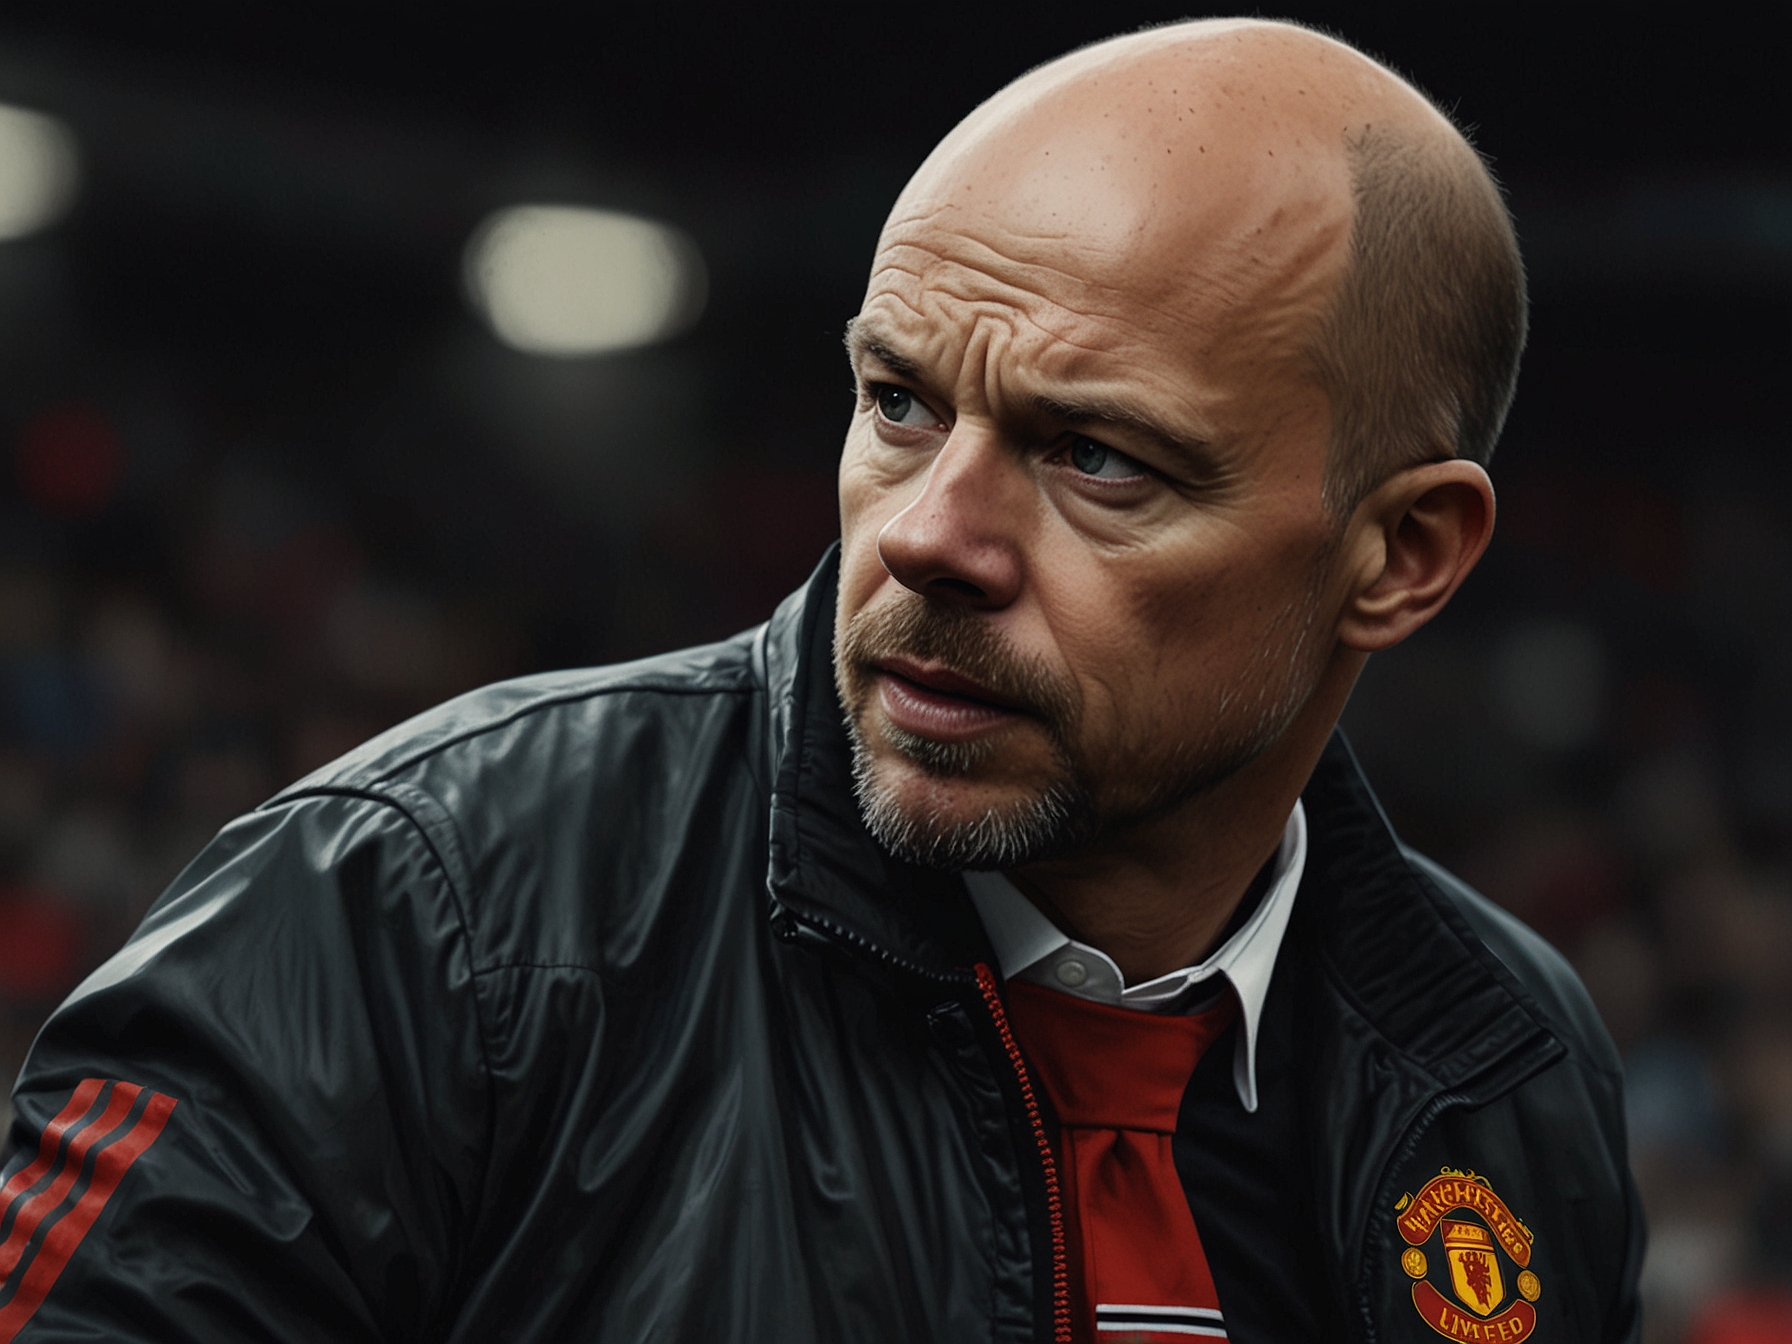 Manchester United's current manager Erik ten Hag strategizing on the sidelines during a match. The potential addition of Rene Hake could complement ten Hag's tactical expertise with high energy and discipline.